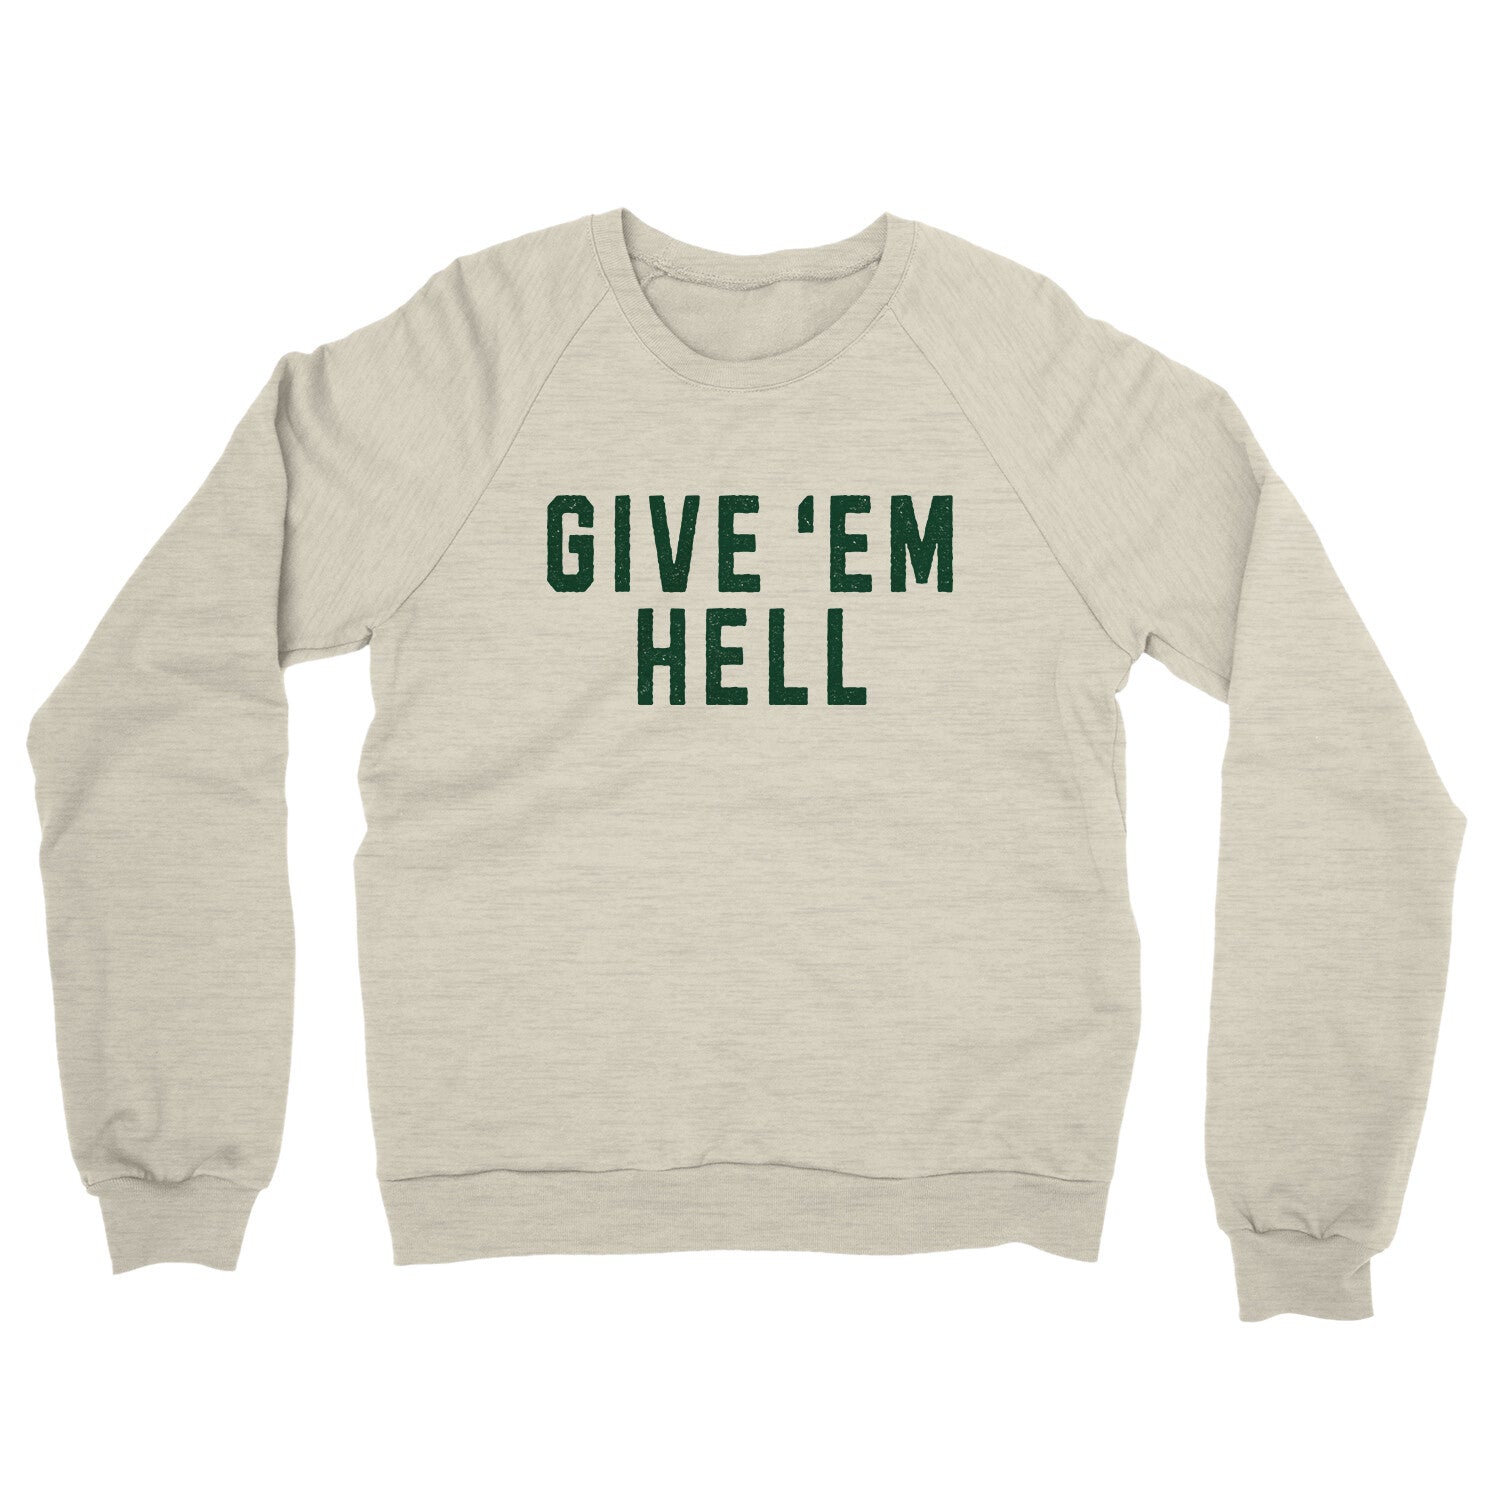 Give ‘em Hell in Heather Oatmeal Color